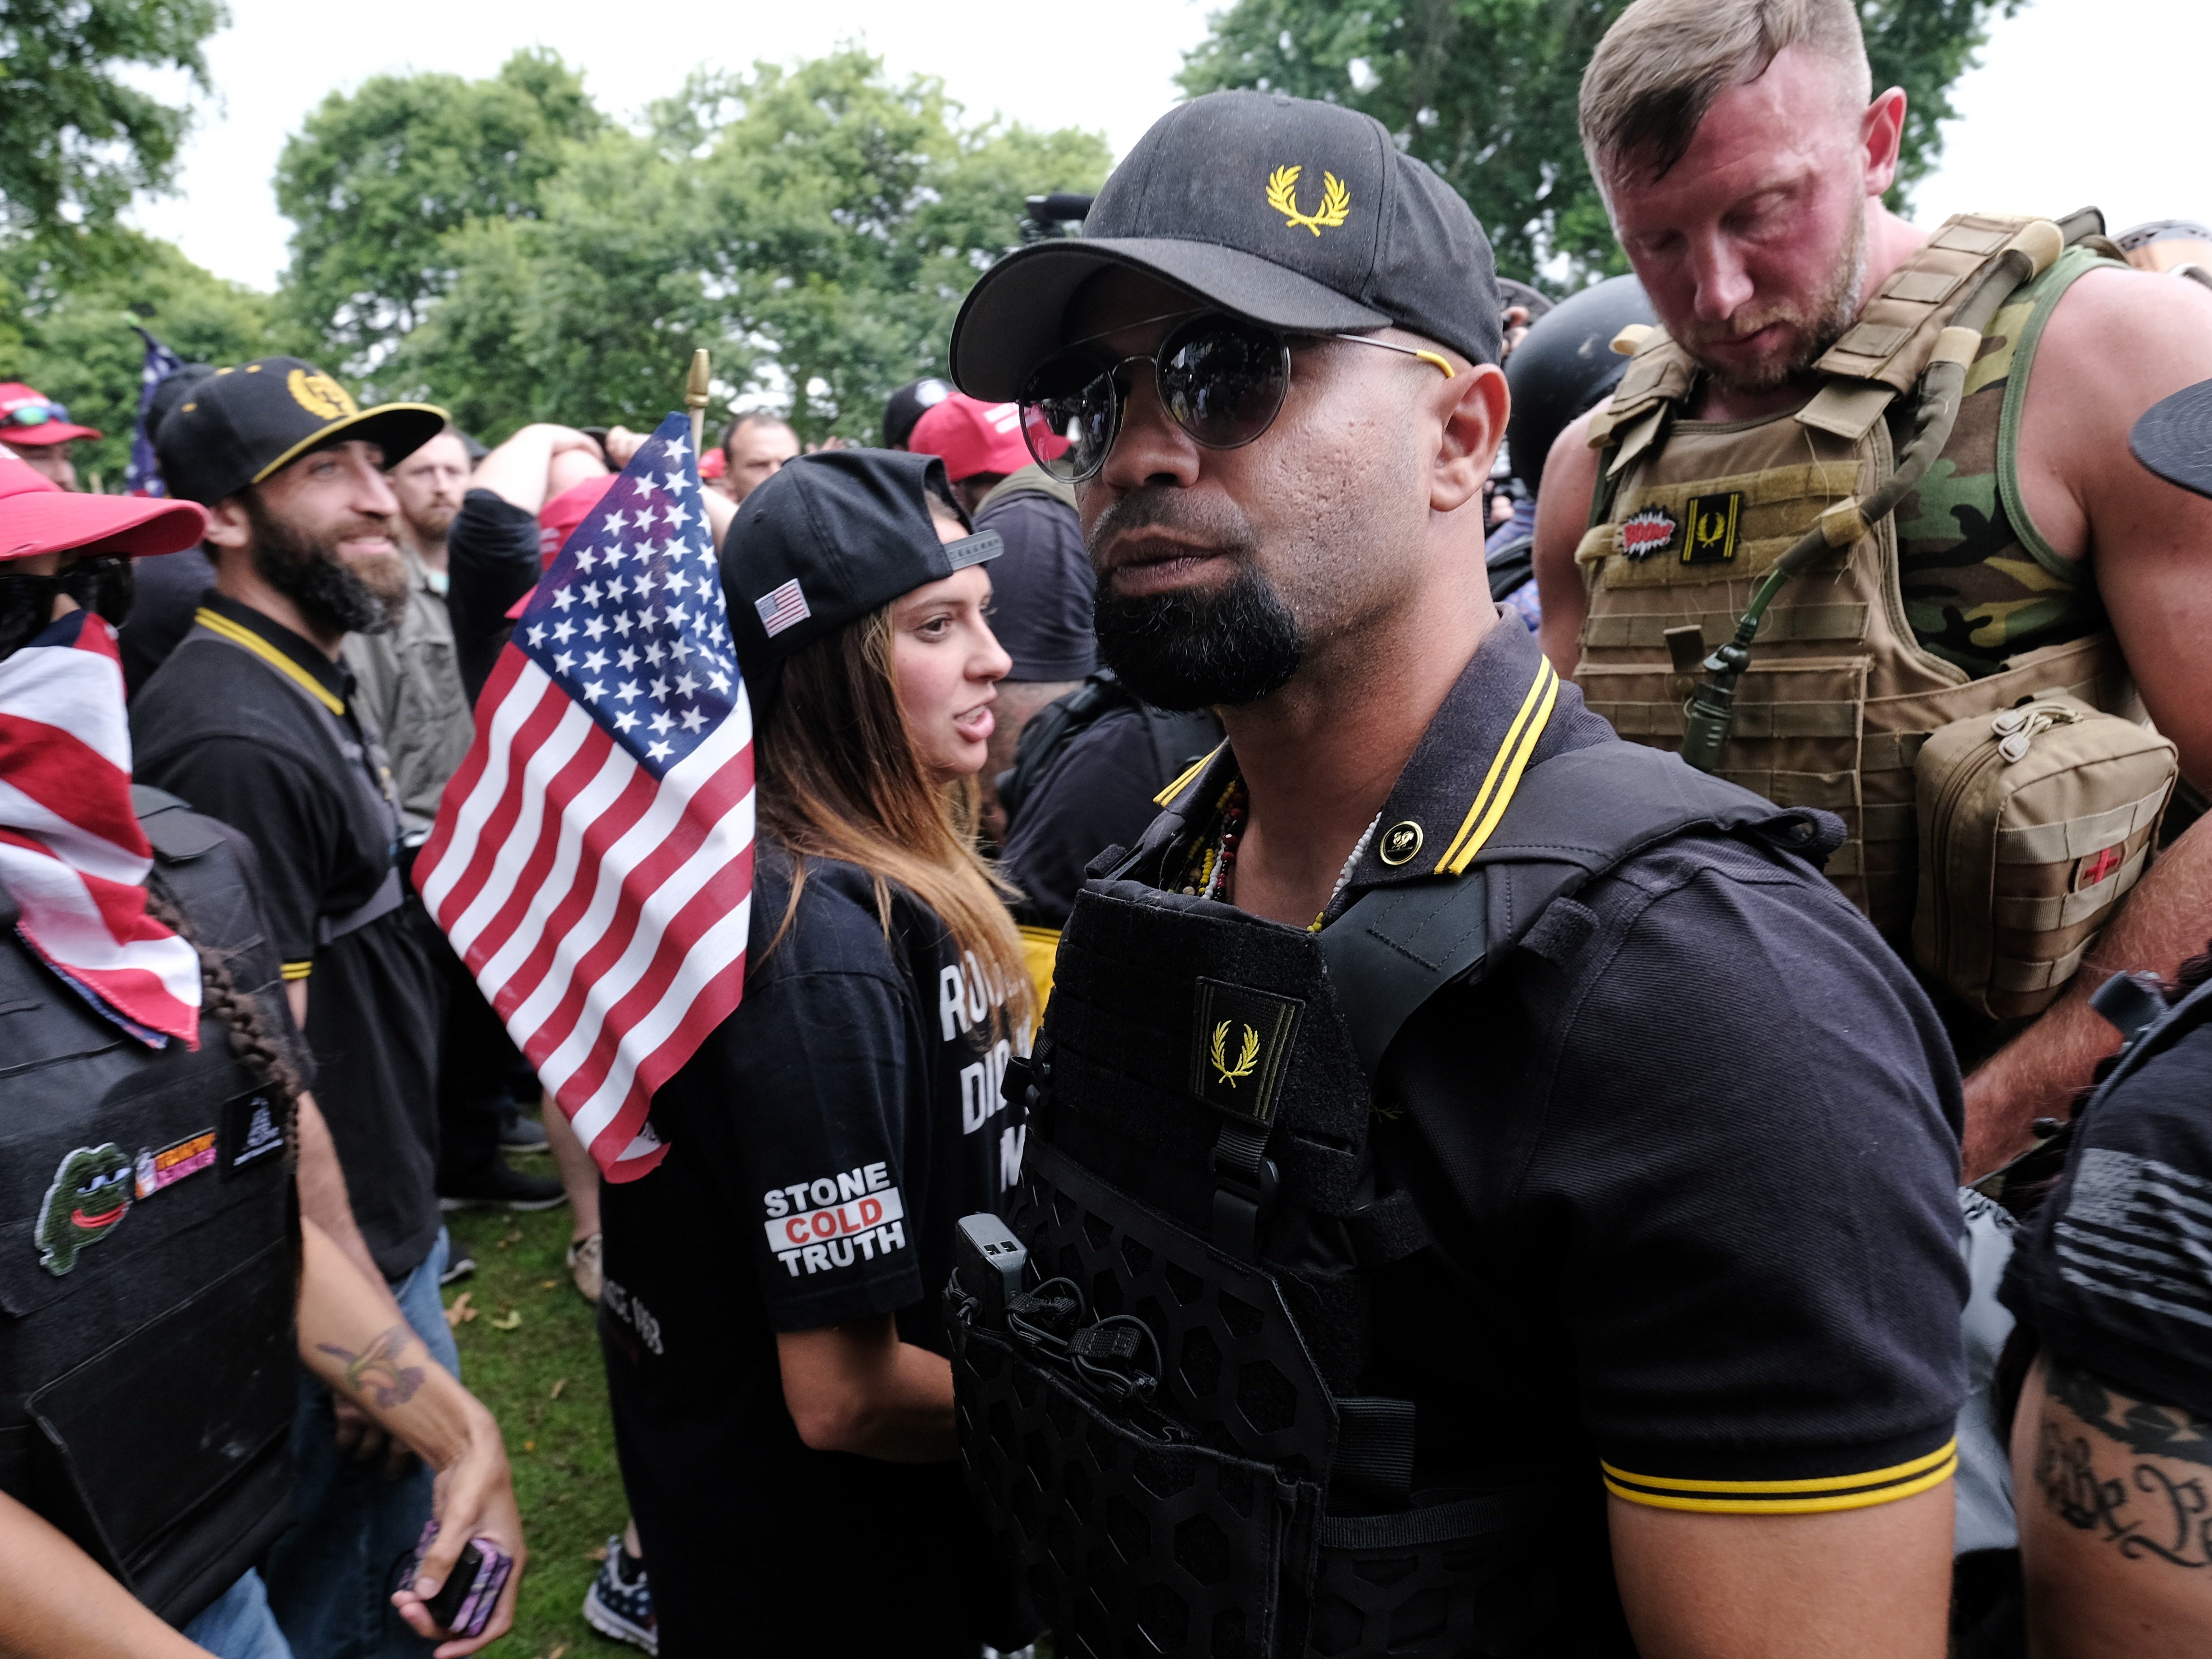 Fashion brand Fred Perry halted sales of a polo shirt adopted by the  far-right Proud Boys group | Business Insider Africa